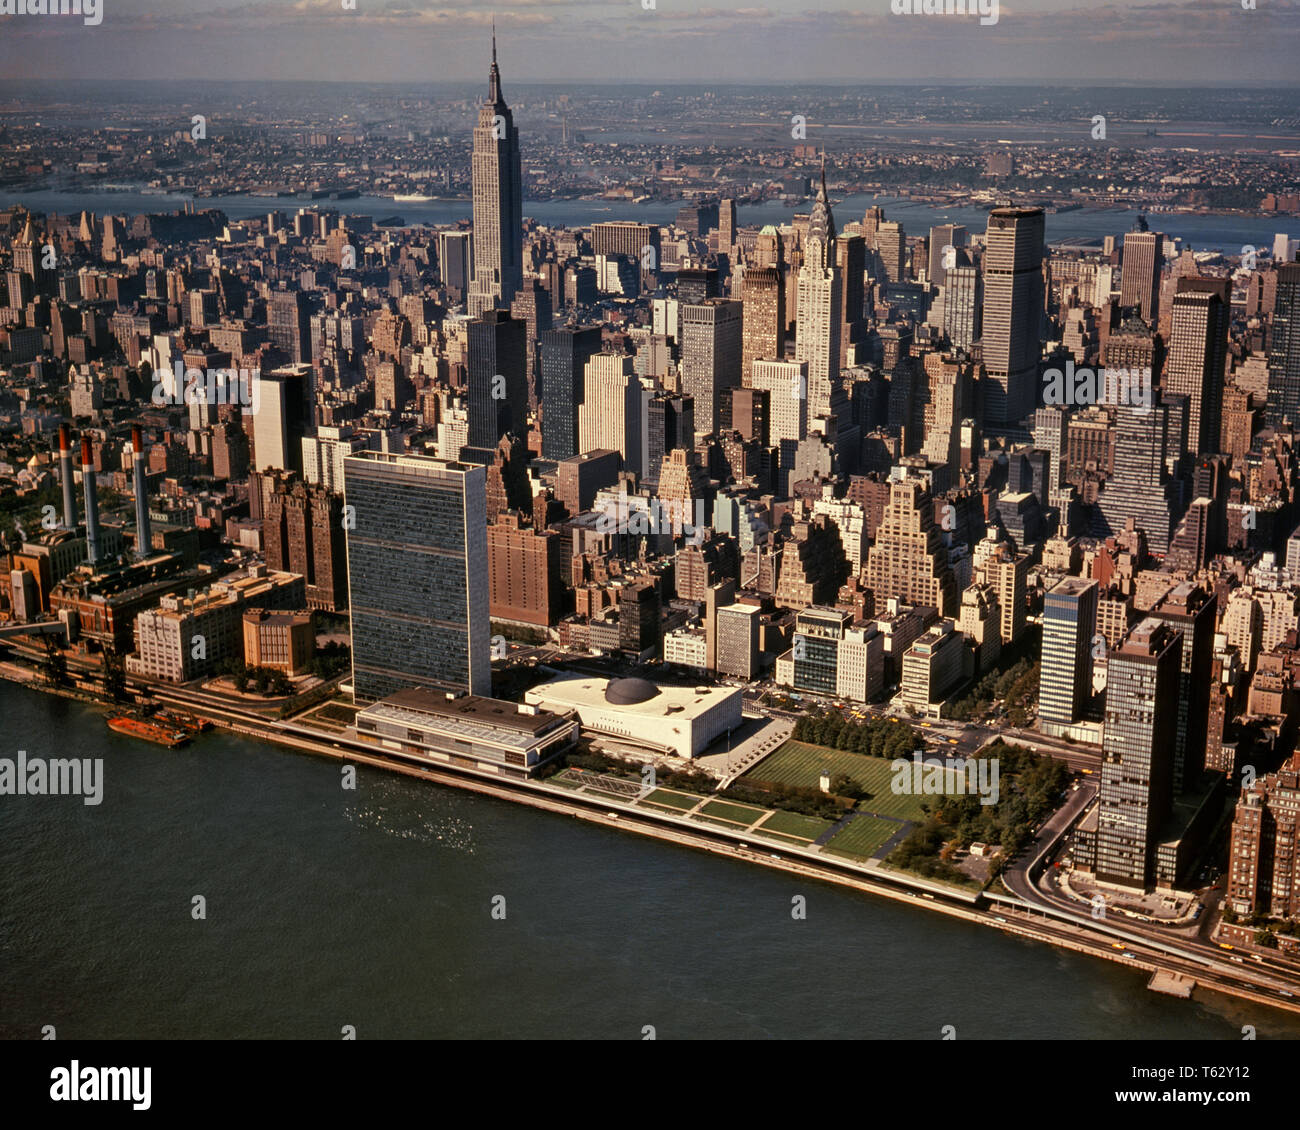 1960s AERIAL VIEW EAST RIVER MIDTOWN UNITED NATIONS COMPLEX EMPIRE STATE BUILDING LOOKING WEST TO NEW JERSEY MANHATTAN NYC USA  - kr15769 KRU001 HARS CELEBRATION UNITED STATES SCENIC INSPIRATION UNITED STATES OF AMERICA EMPIRE NY CONFIDENCE NORTH AMERICA NORTH AMERICAN WIDE ANGLE NATIONS TEMPTATION DREAMS MIDTOWN STRUCTURE URBAN CENTER HIGH ANGLE STRENGTH EXTERIOR KNOWLEDGE LEADERSHIP PROGRESS GOTHAM NORTHEAST TRAVEL USA INNOVATION PRIDE TO NYC POLITICS CONCEPTUAL EAST COAST NEW YORK CITIES COMPLEX IMAGINATION STYLISH NEW JERSEY NEW YORK CITY CREATIVITY IDEAS RESORTS AERIAL VIEW BIG APPLE Stock Photo